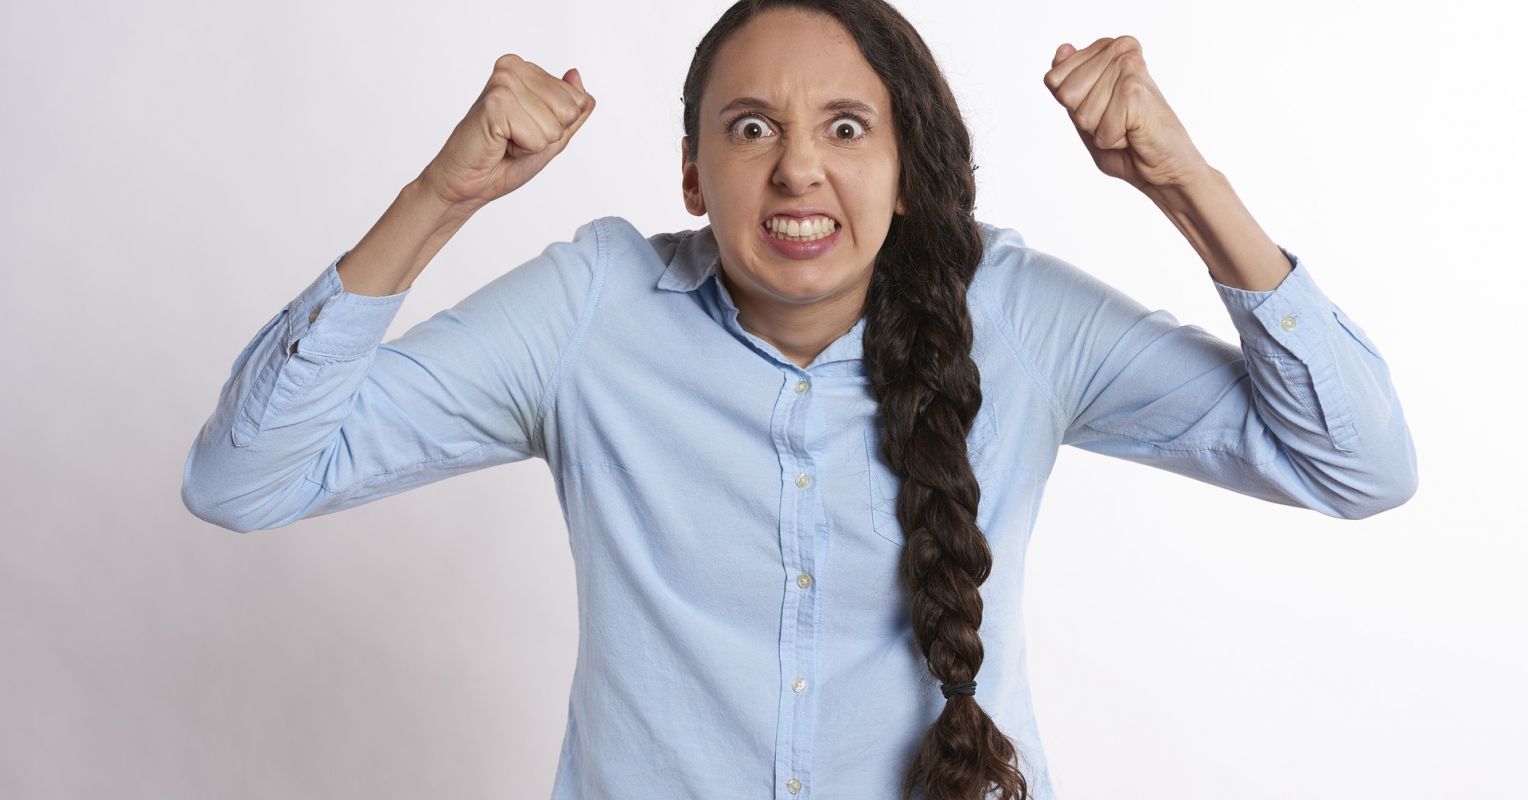 Who Is the Crazy One? | Psychology Today